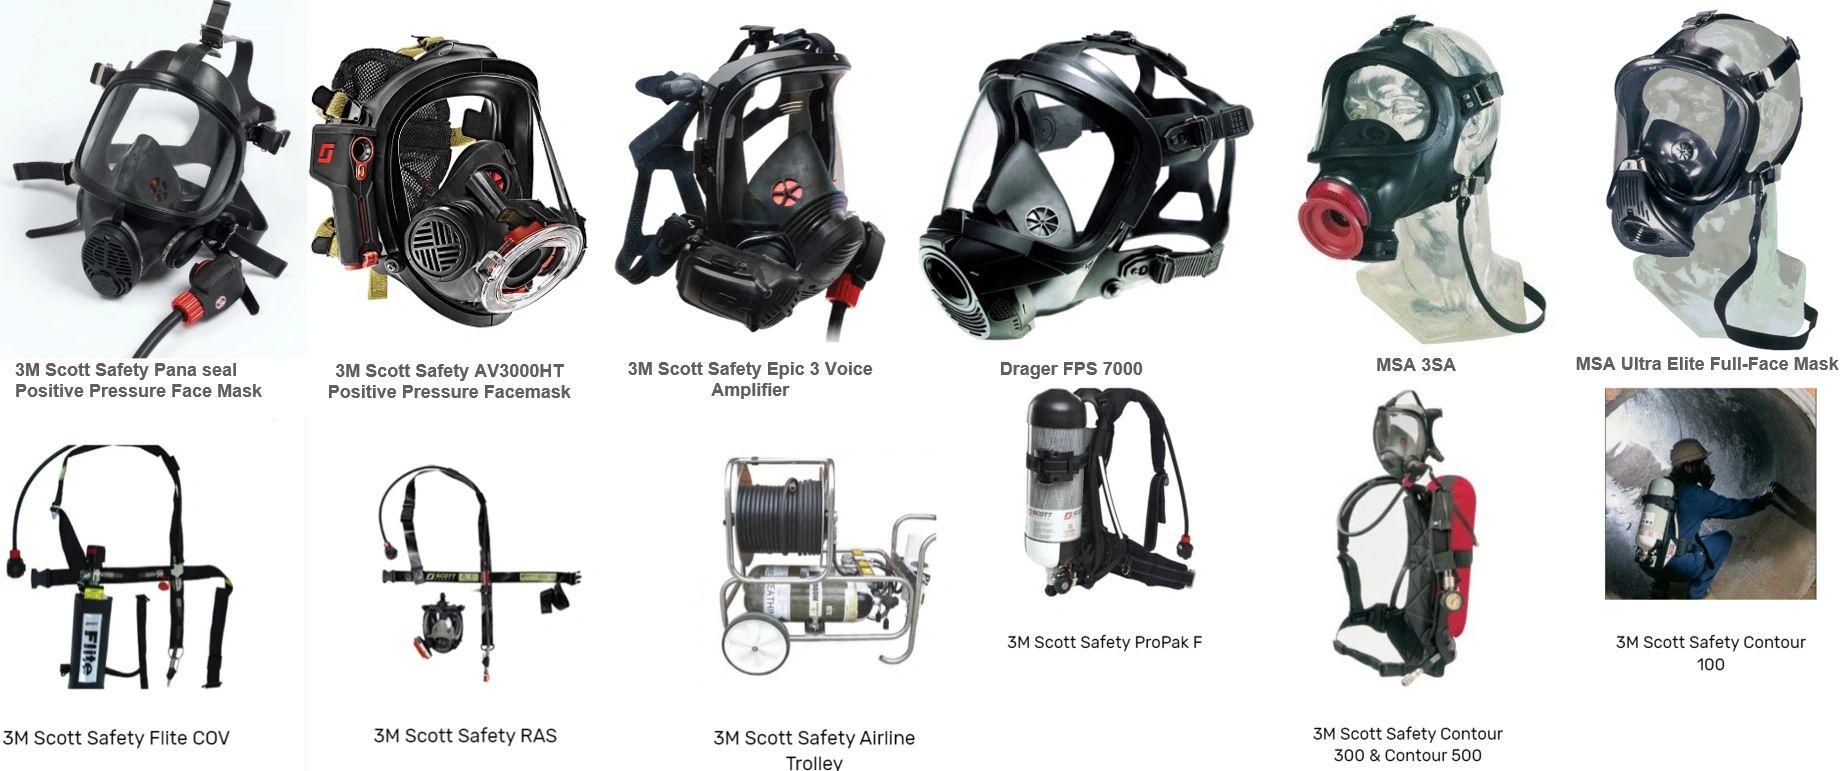 The 3M™ Scot Safety range of SCBA offers proven,trusted performance to help get the job done safely.